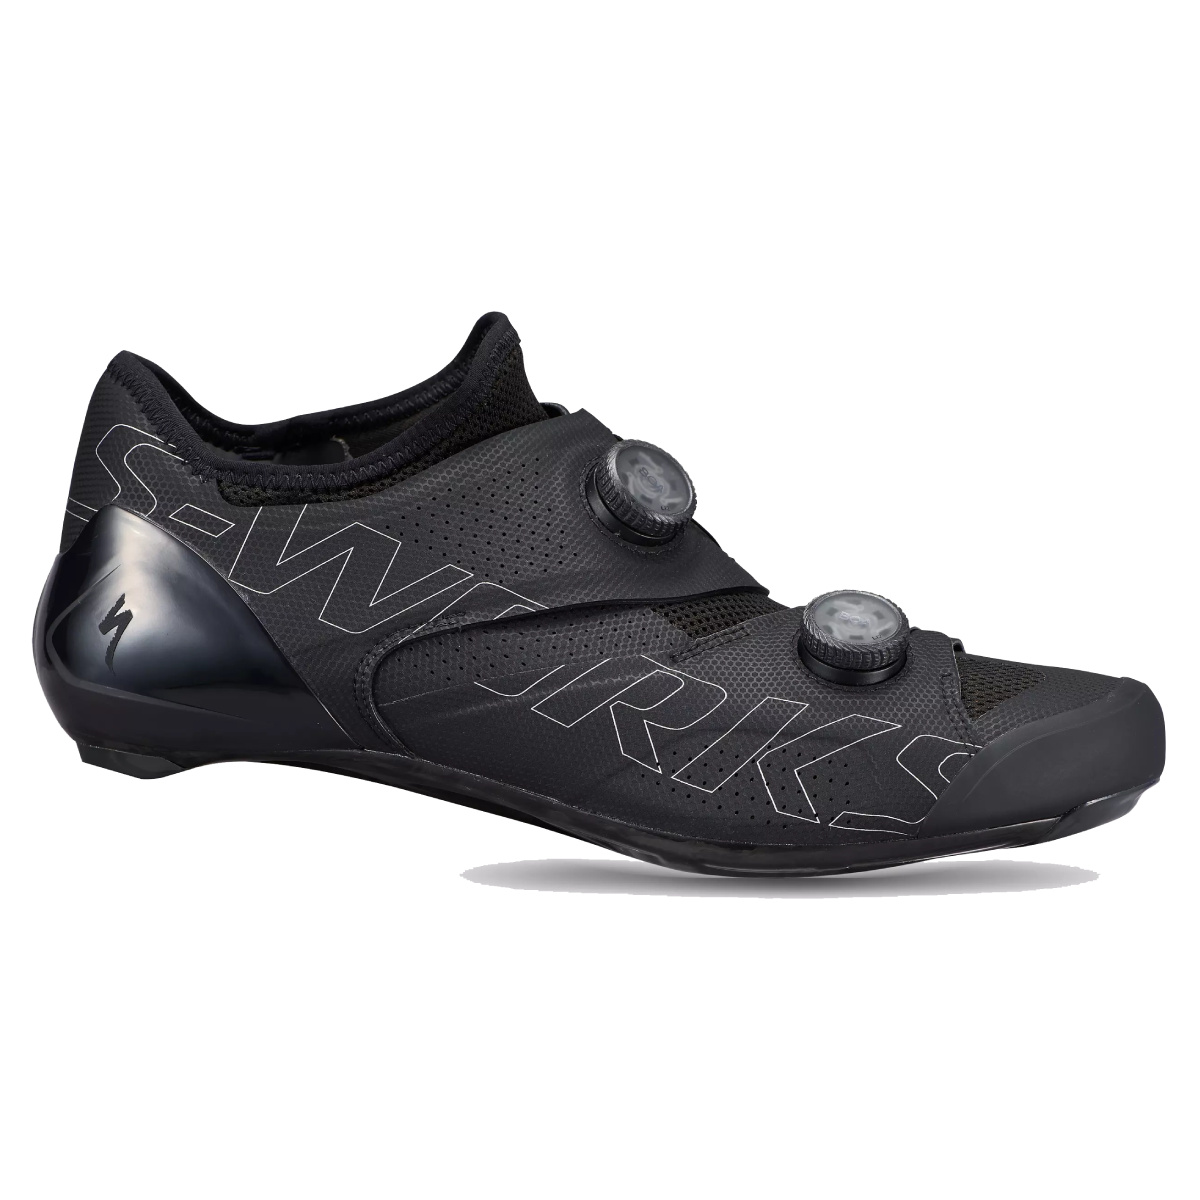 Chaussures Specialized S-Works Ares large